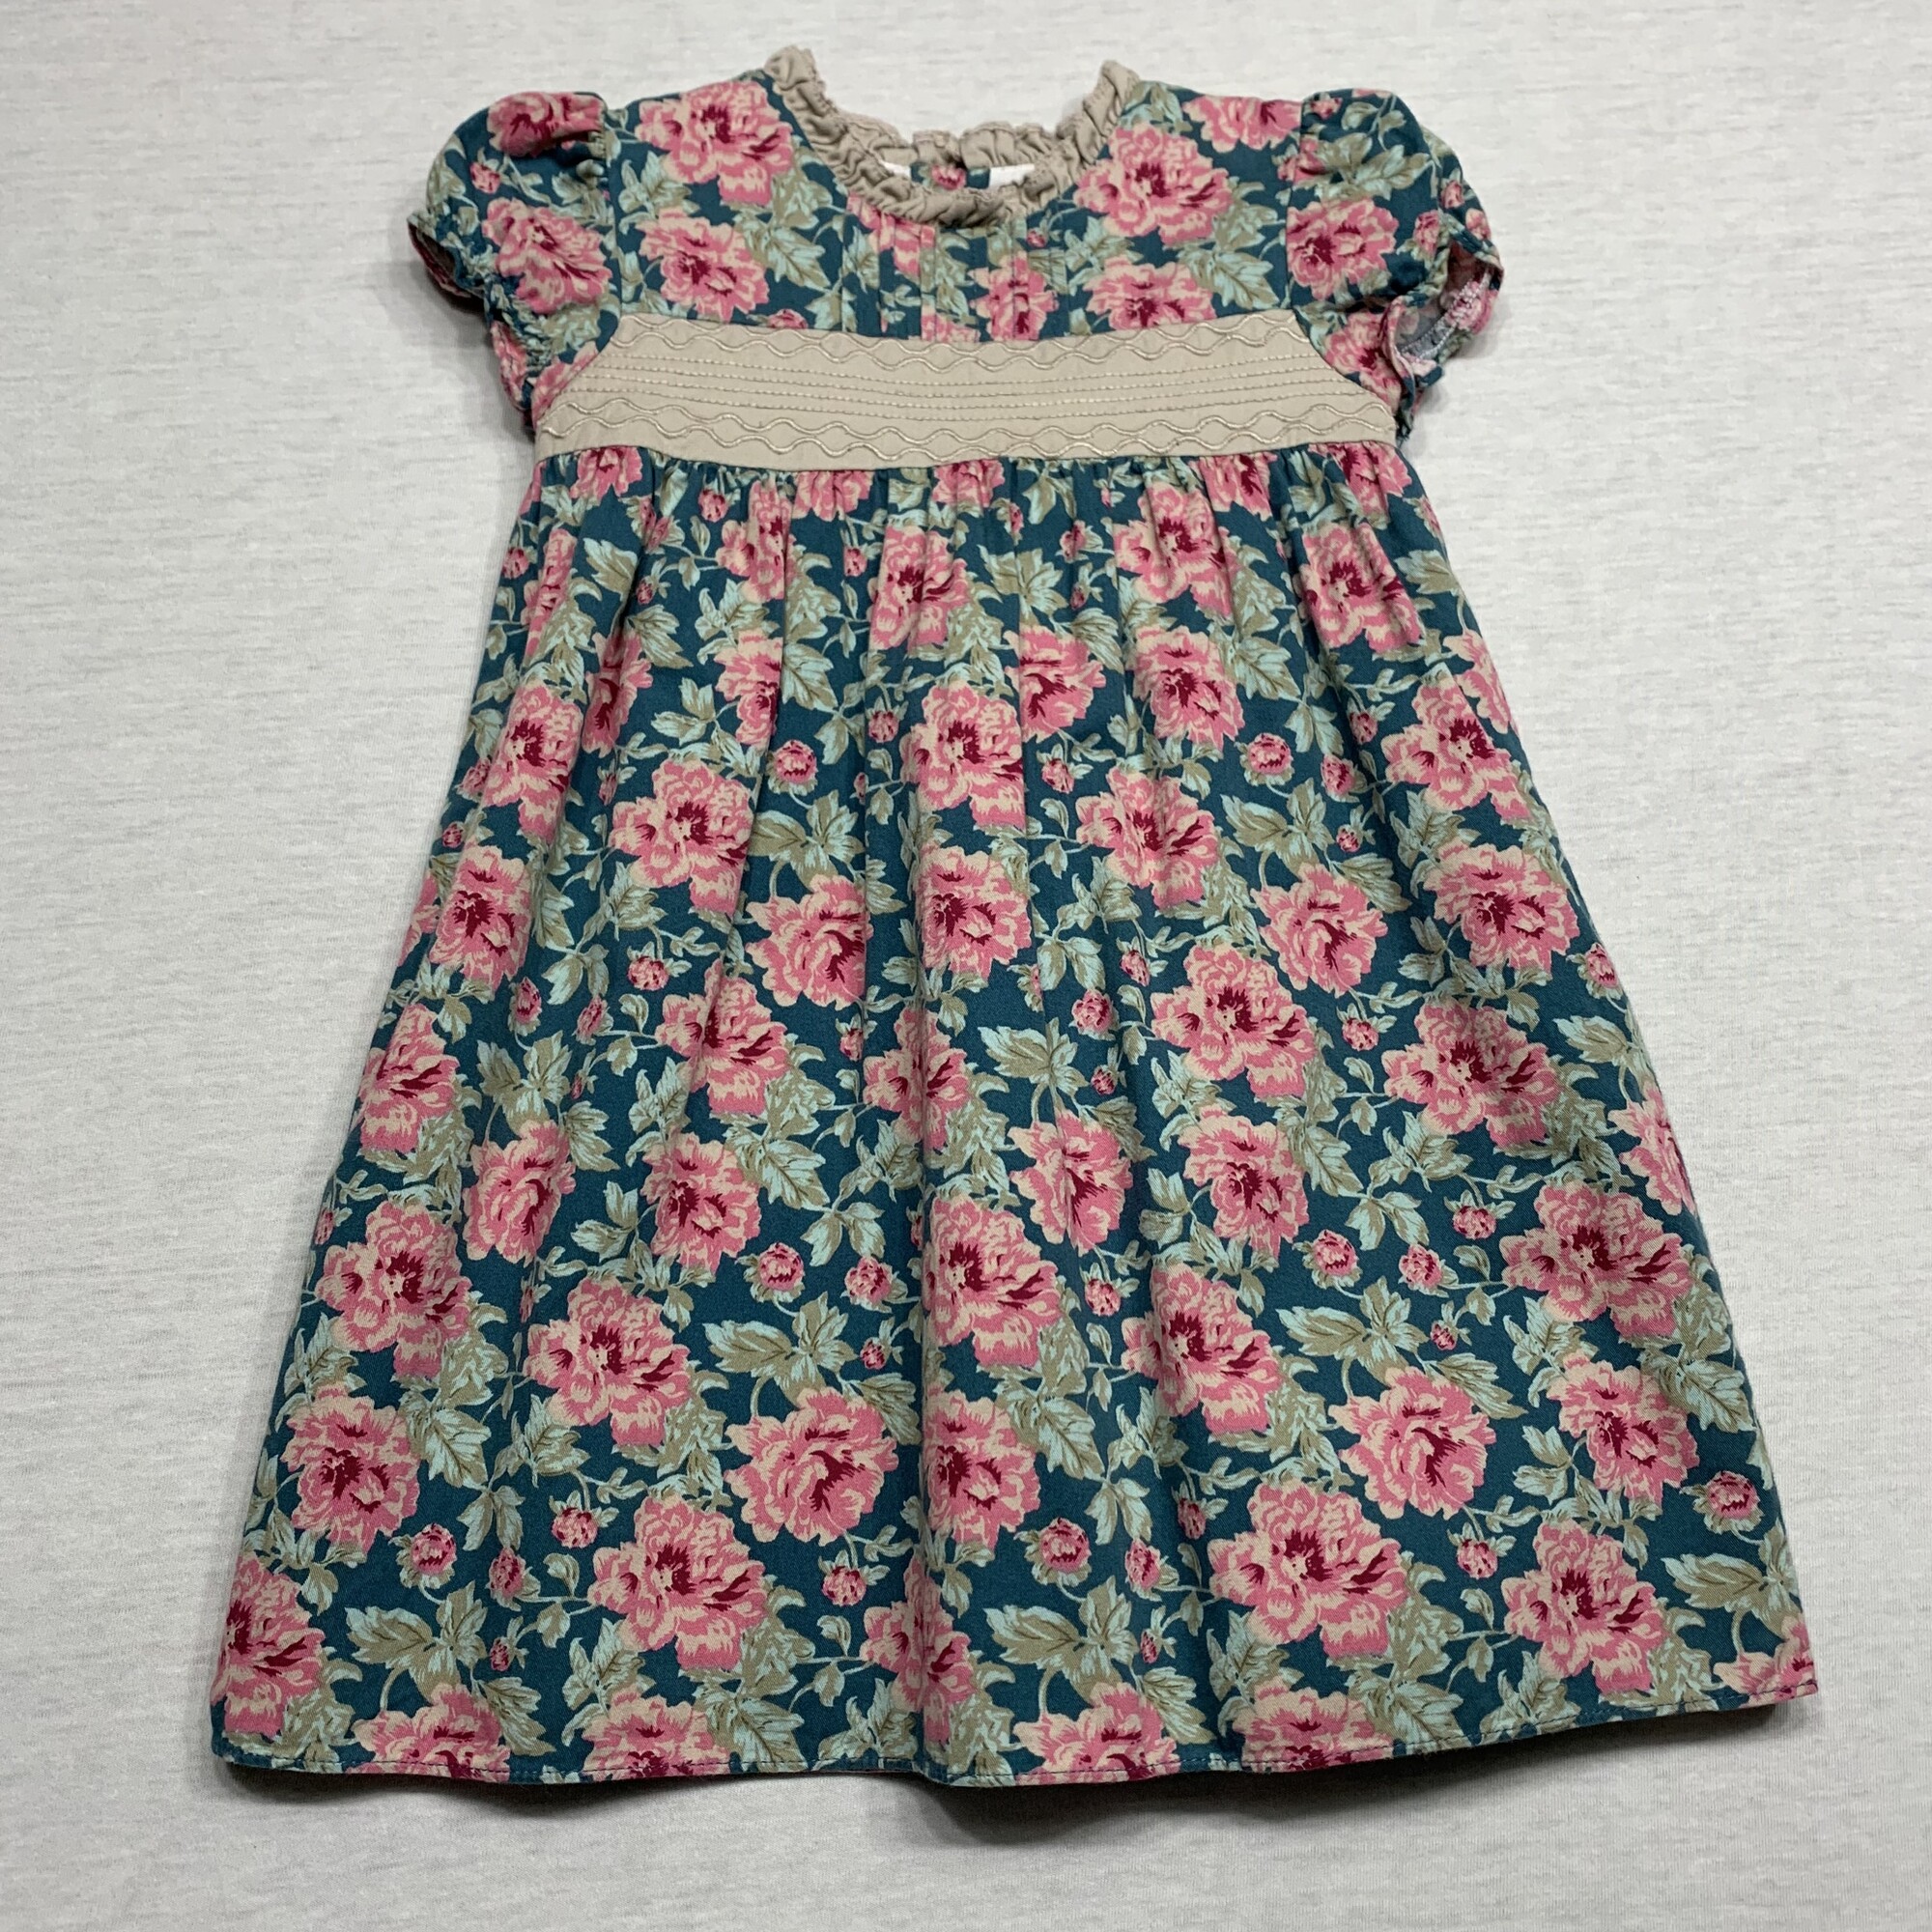 Floral dress with embroidered detail, lined in cotton/poly blend